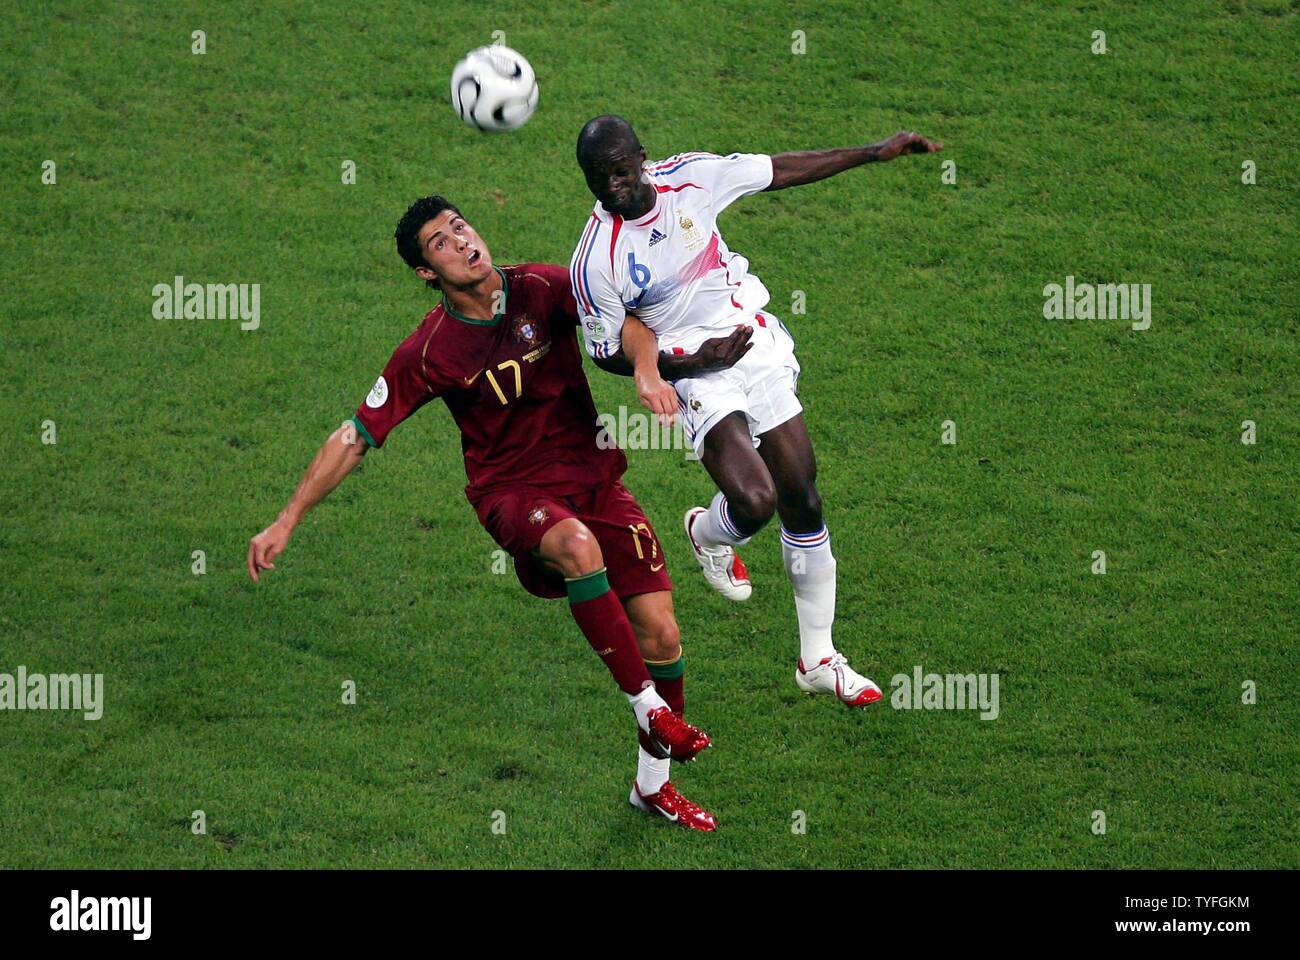 Portugal's Cristiano Ronaldo and France's Claude Makelele during the semi-final of the FIFA World Cup match in Munich Germany on July 5, 2006. France defeated Portugal 1:0.  (UPI  Photo/Christian Brunskill) Stock Photo